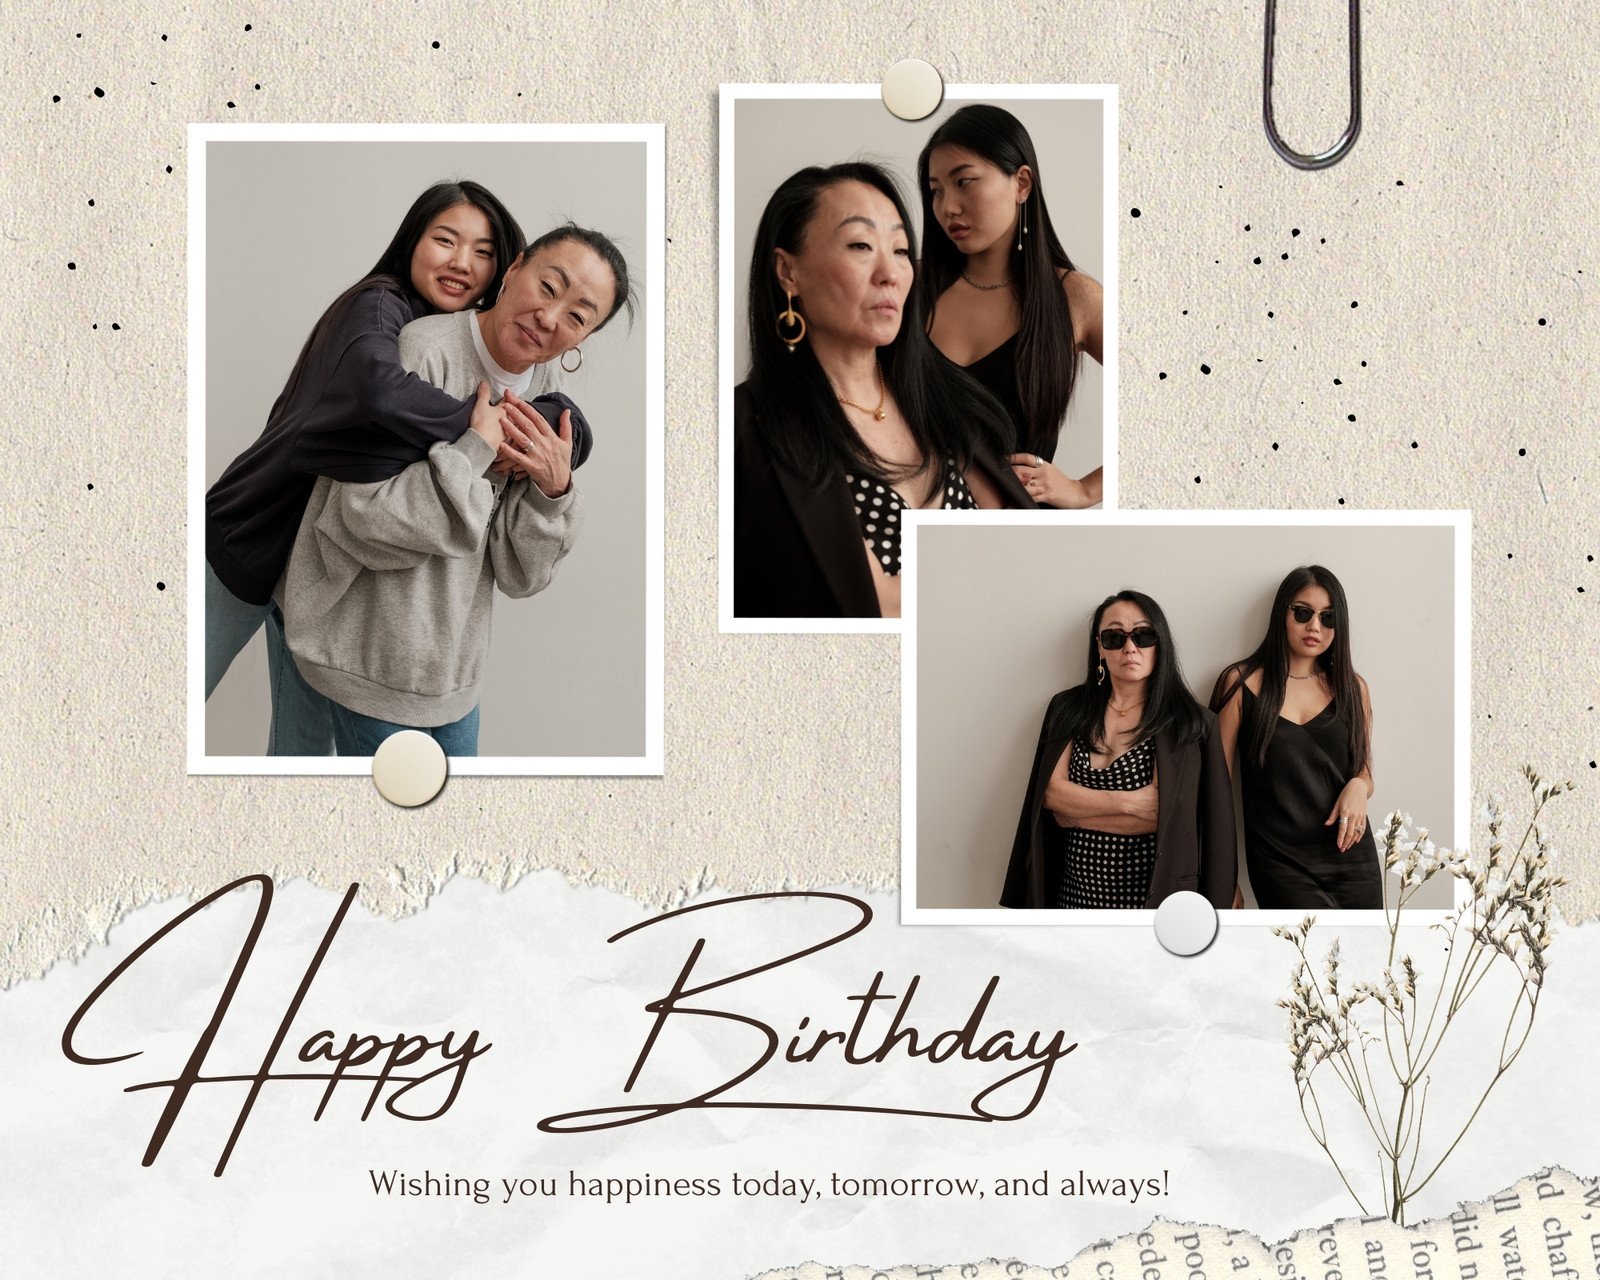 How To Make Photo Collage For Birthday Gift?